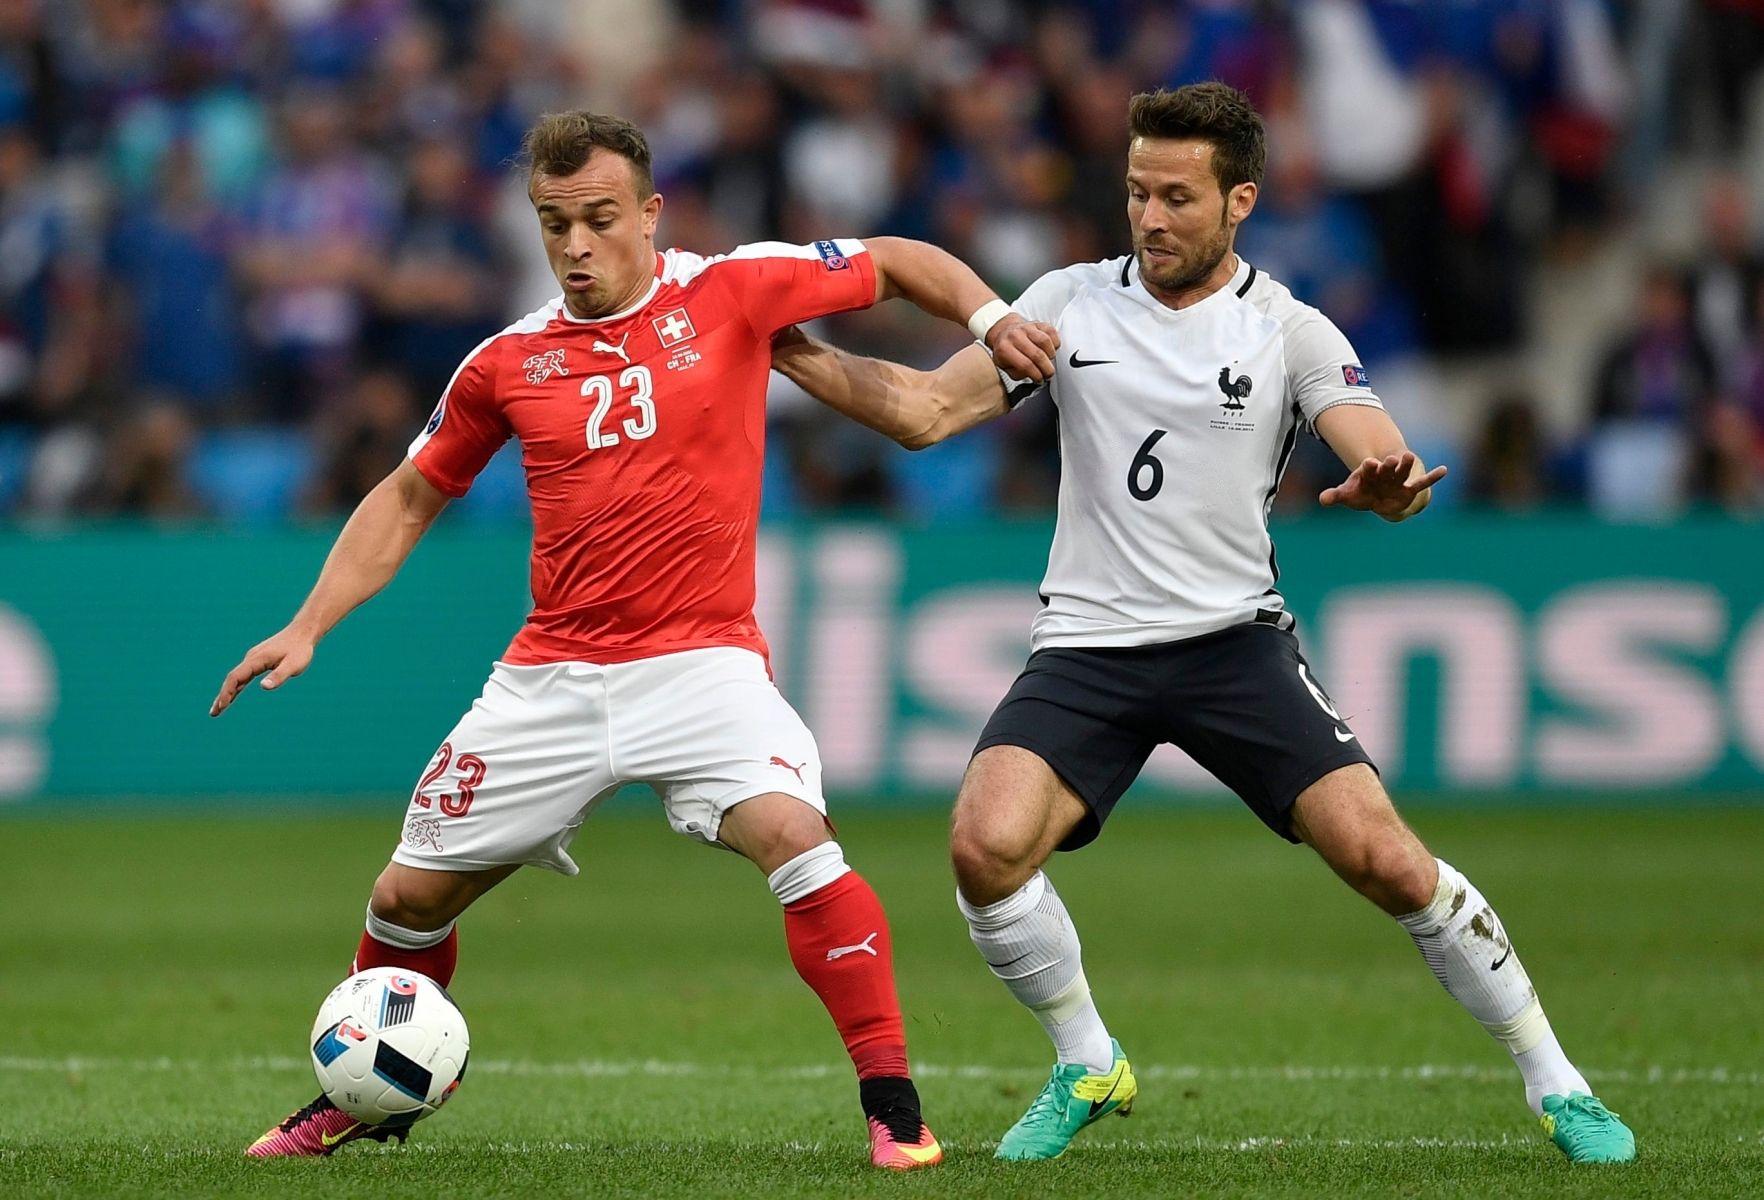 Switzerland's Xherdan Shaqiri, left, fights for the ball with France's Yohan Cabaye during the Euro 2016 Group A soccer match between Switzerland and France at the Pierre Mauroy stadium in Villeneuve díAscq, near Lille, France, Sunday, June 19, 2016. (AP Photo/Martin Meissner) Soccer Euro 2016 Switzerland France